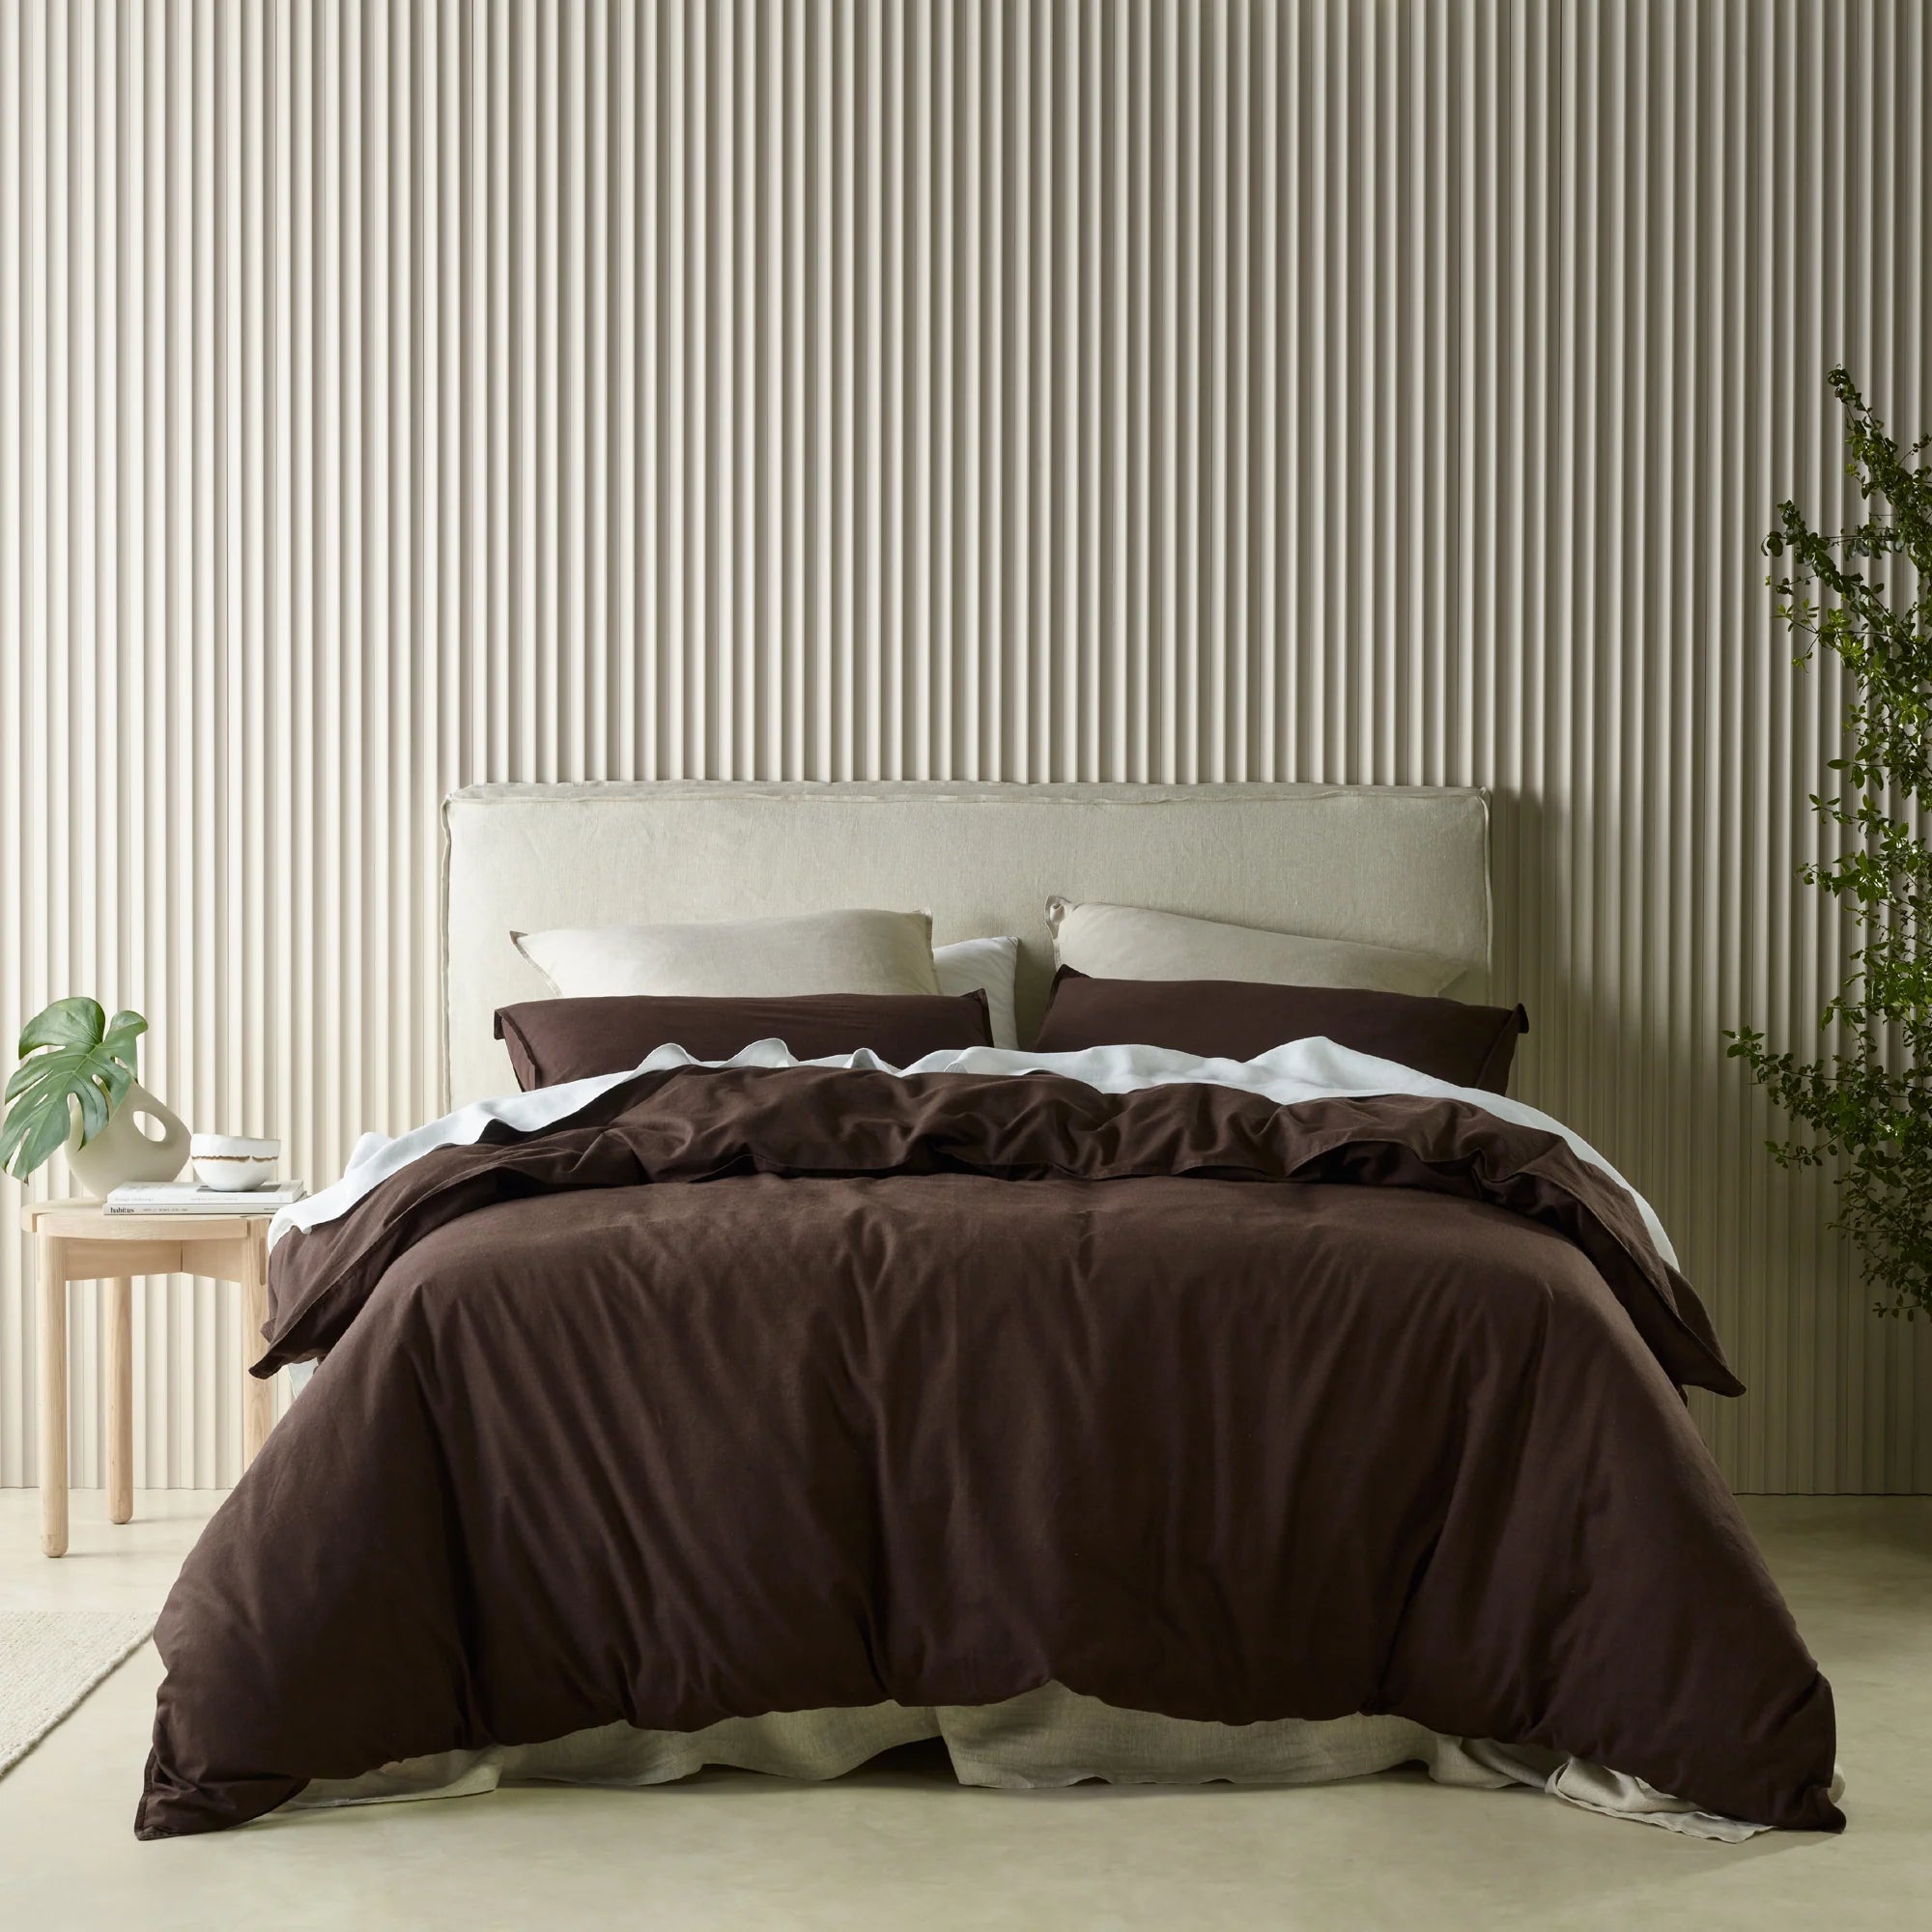 The Acacia range is made from super soft washed cotton percale fabric. An easy-care quilt cover set that requires very minimal ironing. It also features a trendy tailored edge with twin needle stitching to complete the look.